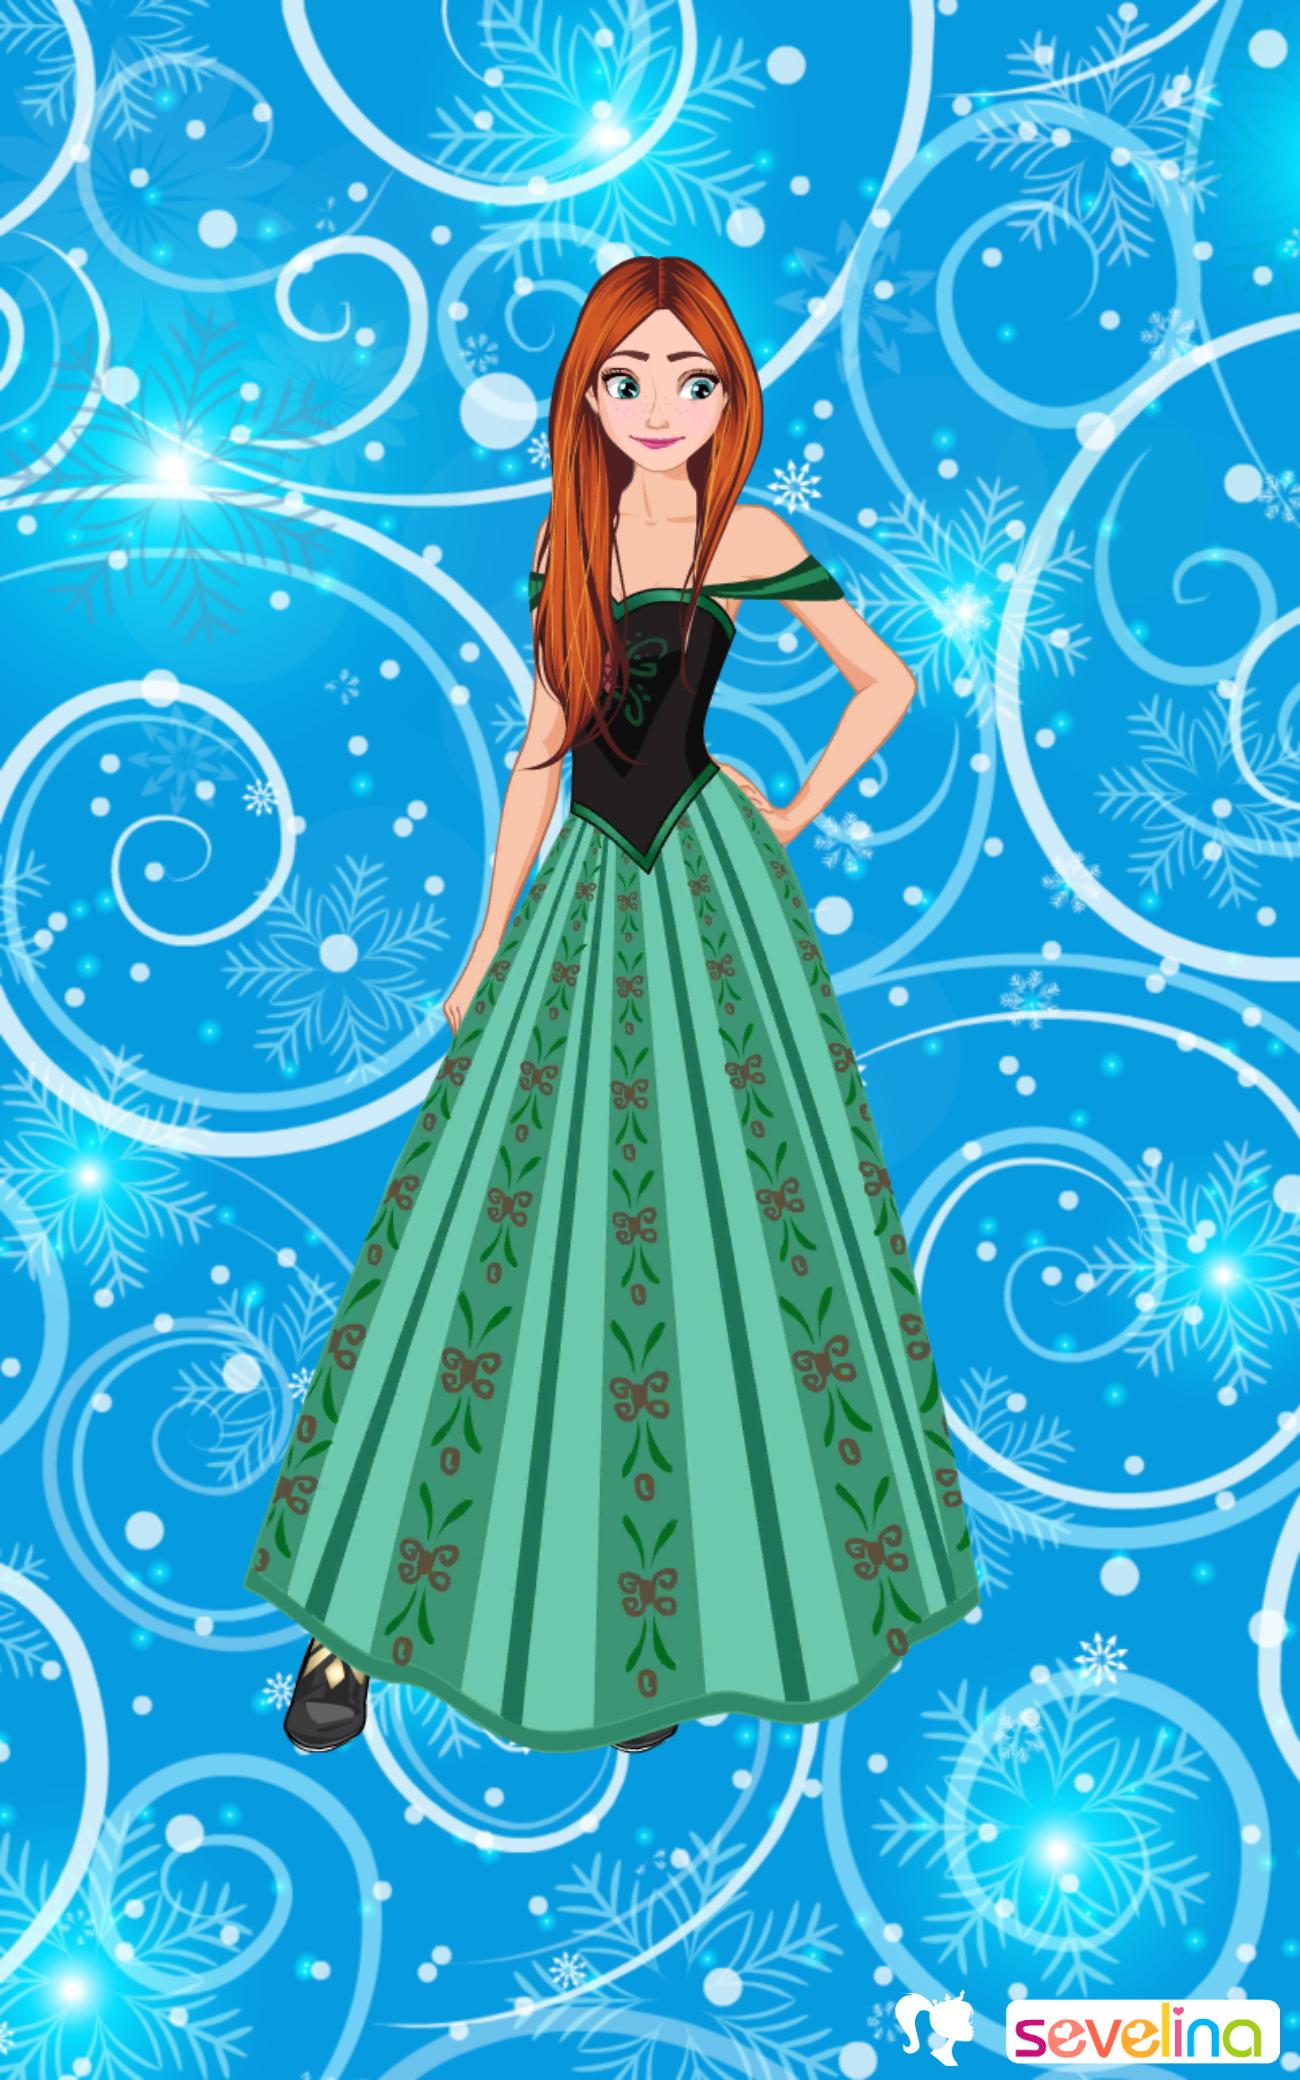 ❄️ Icy or Fire 🔥 dress up game ❄️ Frozen land 2.4 Screenshot 7